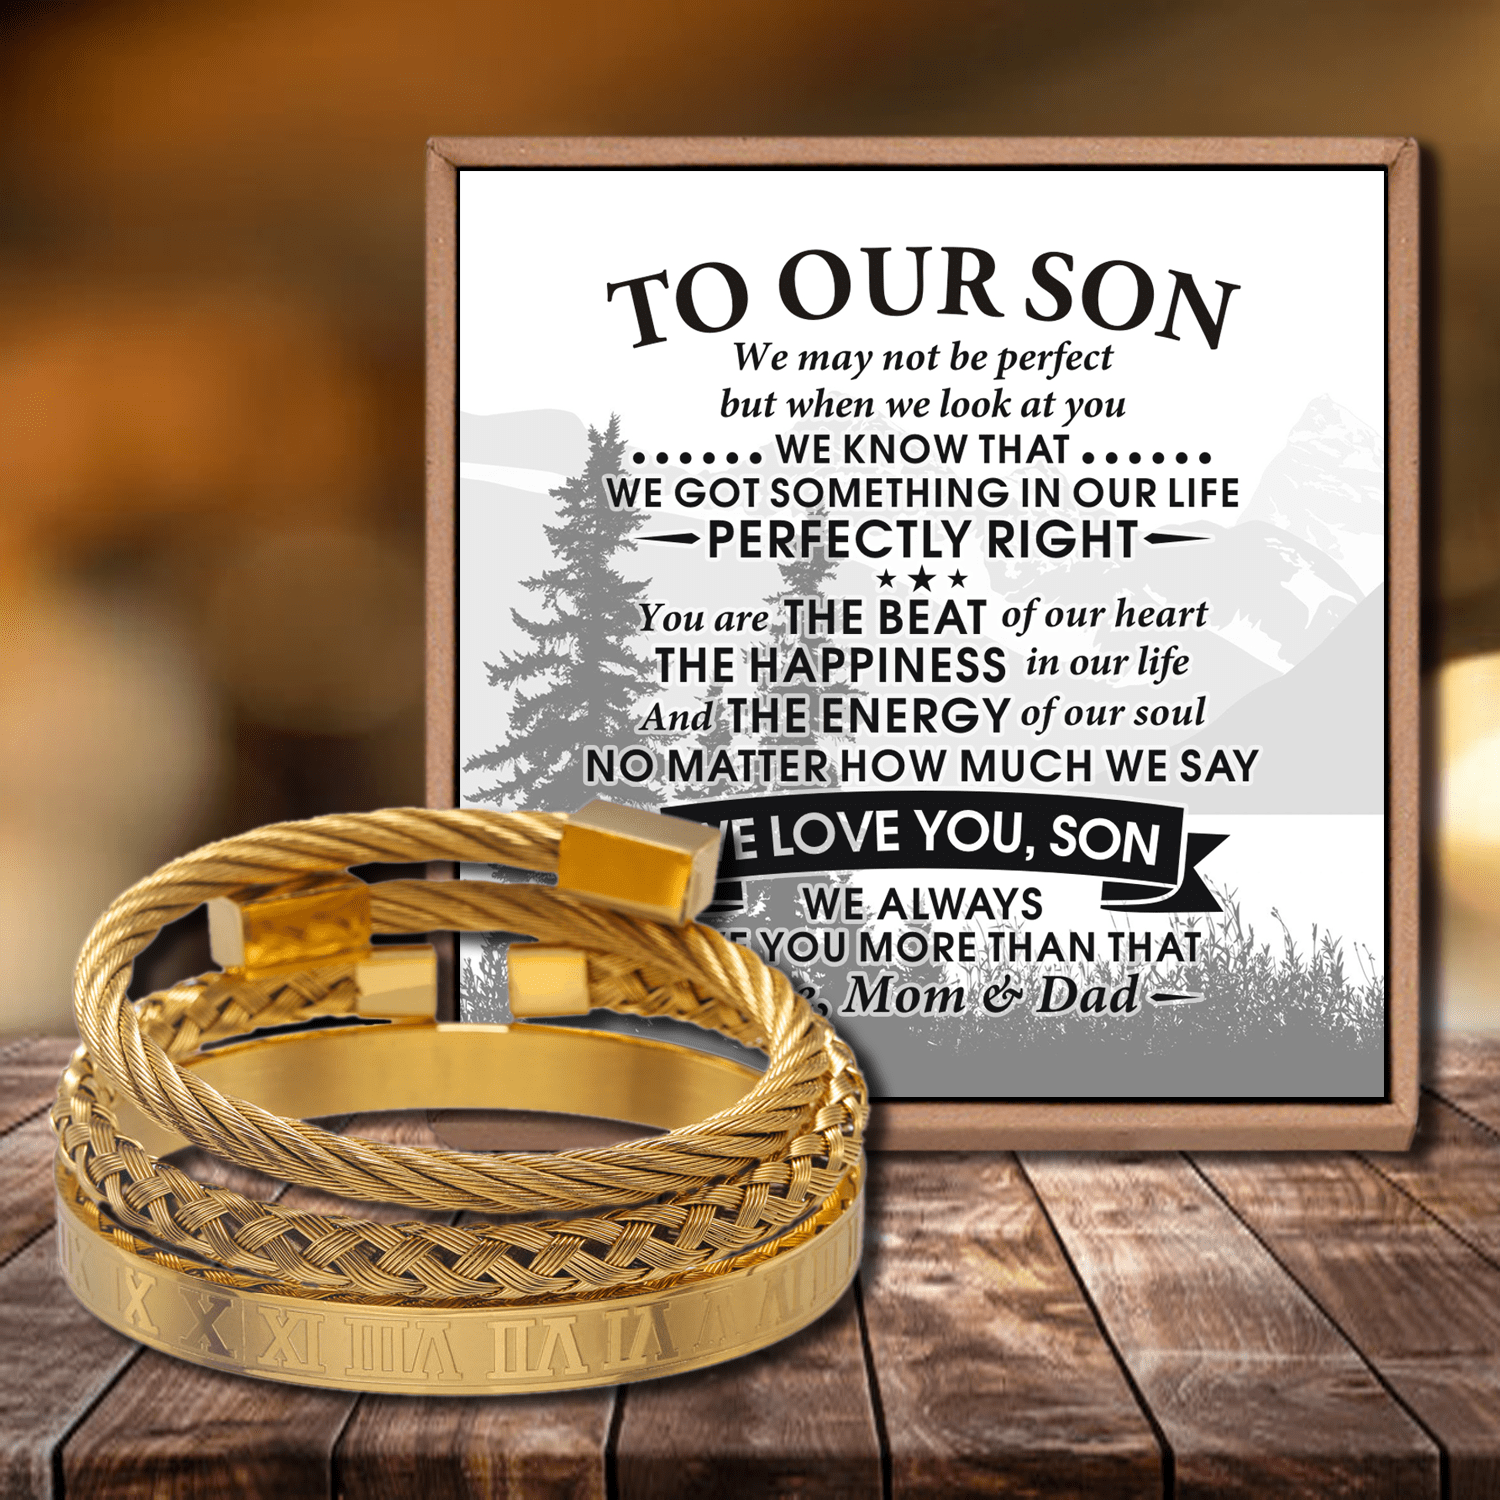 Bracelets To Our Son - We Love You Roman Numeral Bangle Weave Bracelets Set Gold GiveMe-Gifts